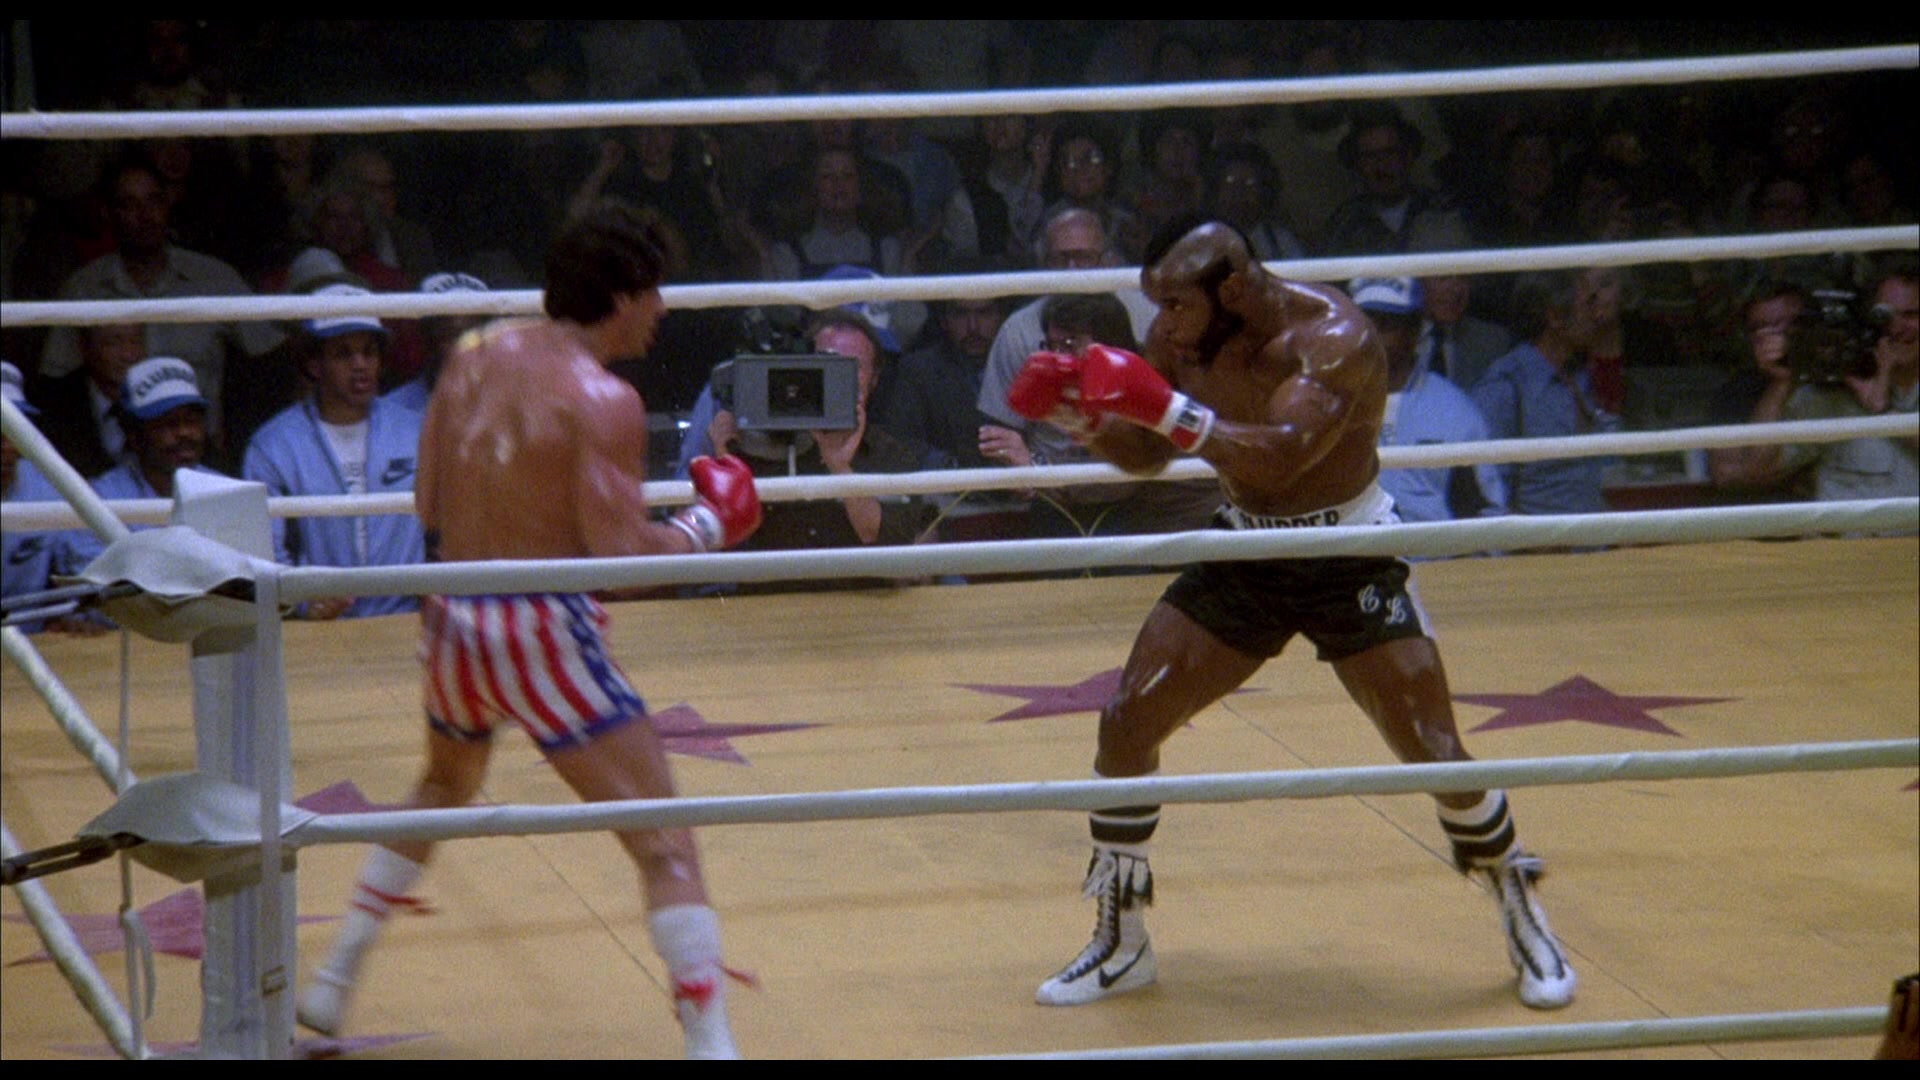 Nike Boxing Shoes Worn by Mr. T (Clubber Lang) in Rocky 3 (1982) Movie1920 x 1080